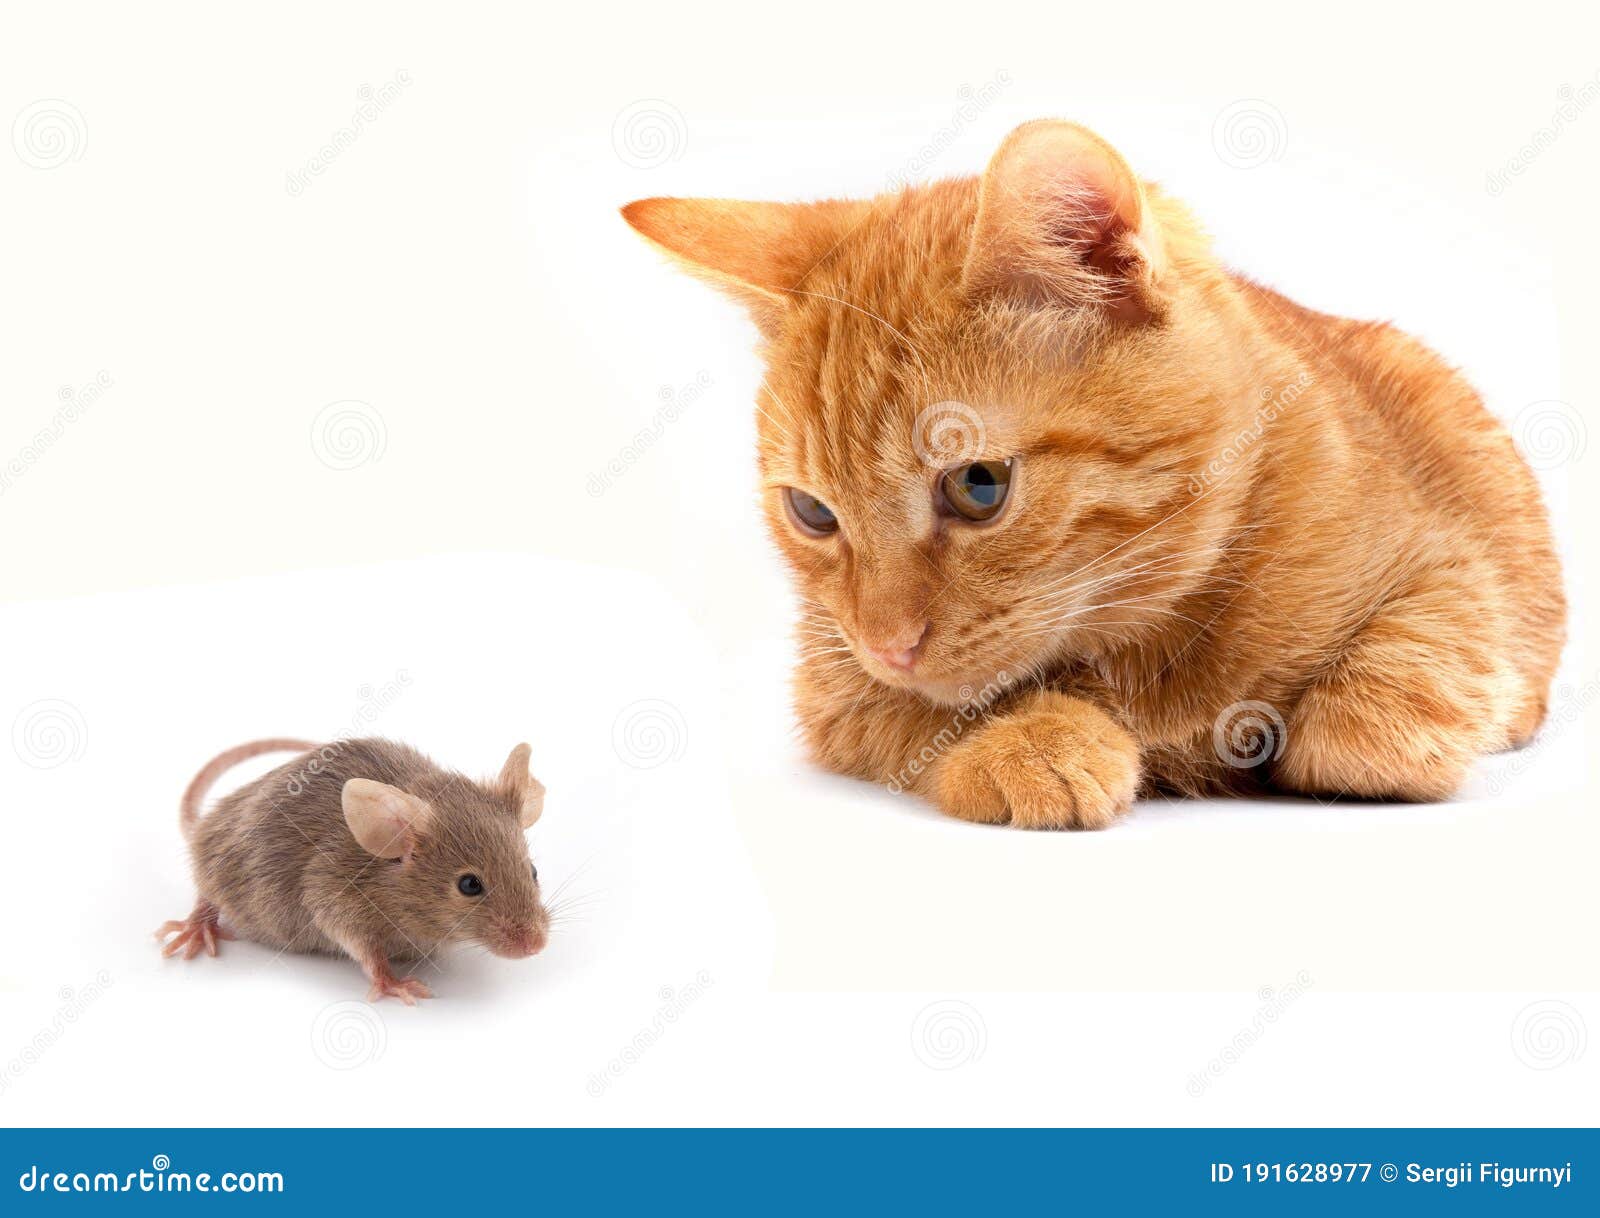 Cat Pouncing Mouse Photos Free Royalty Free Stock Photos From Dreamstime